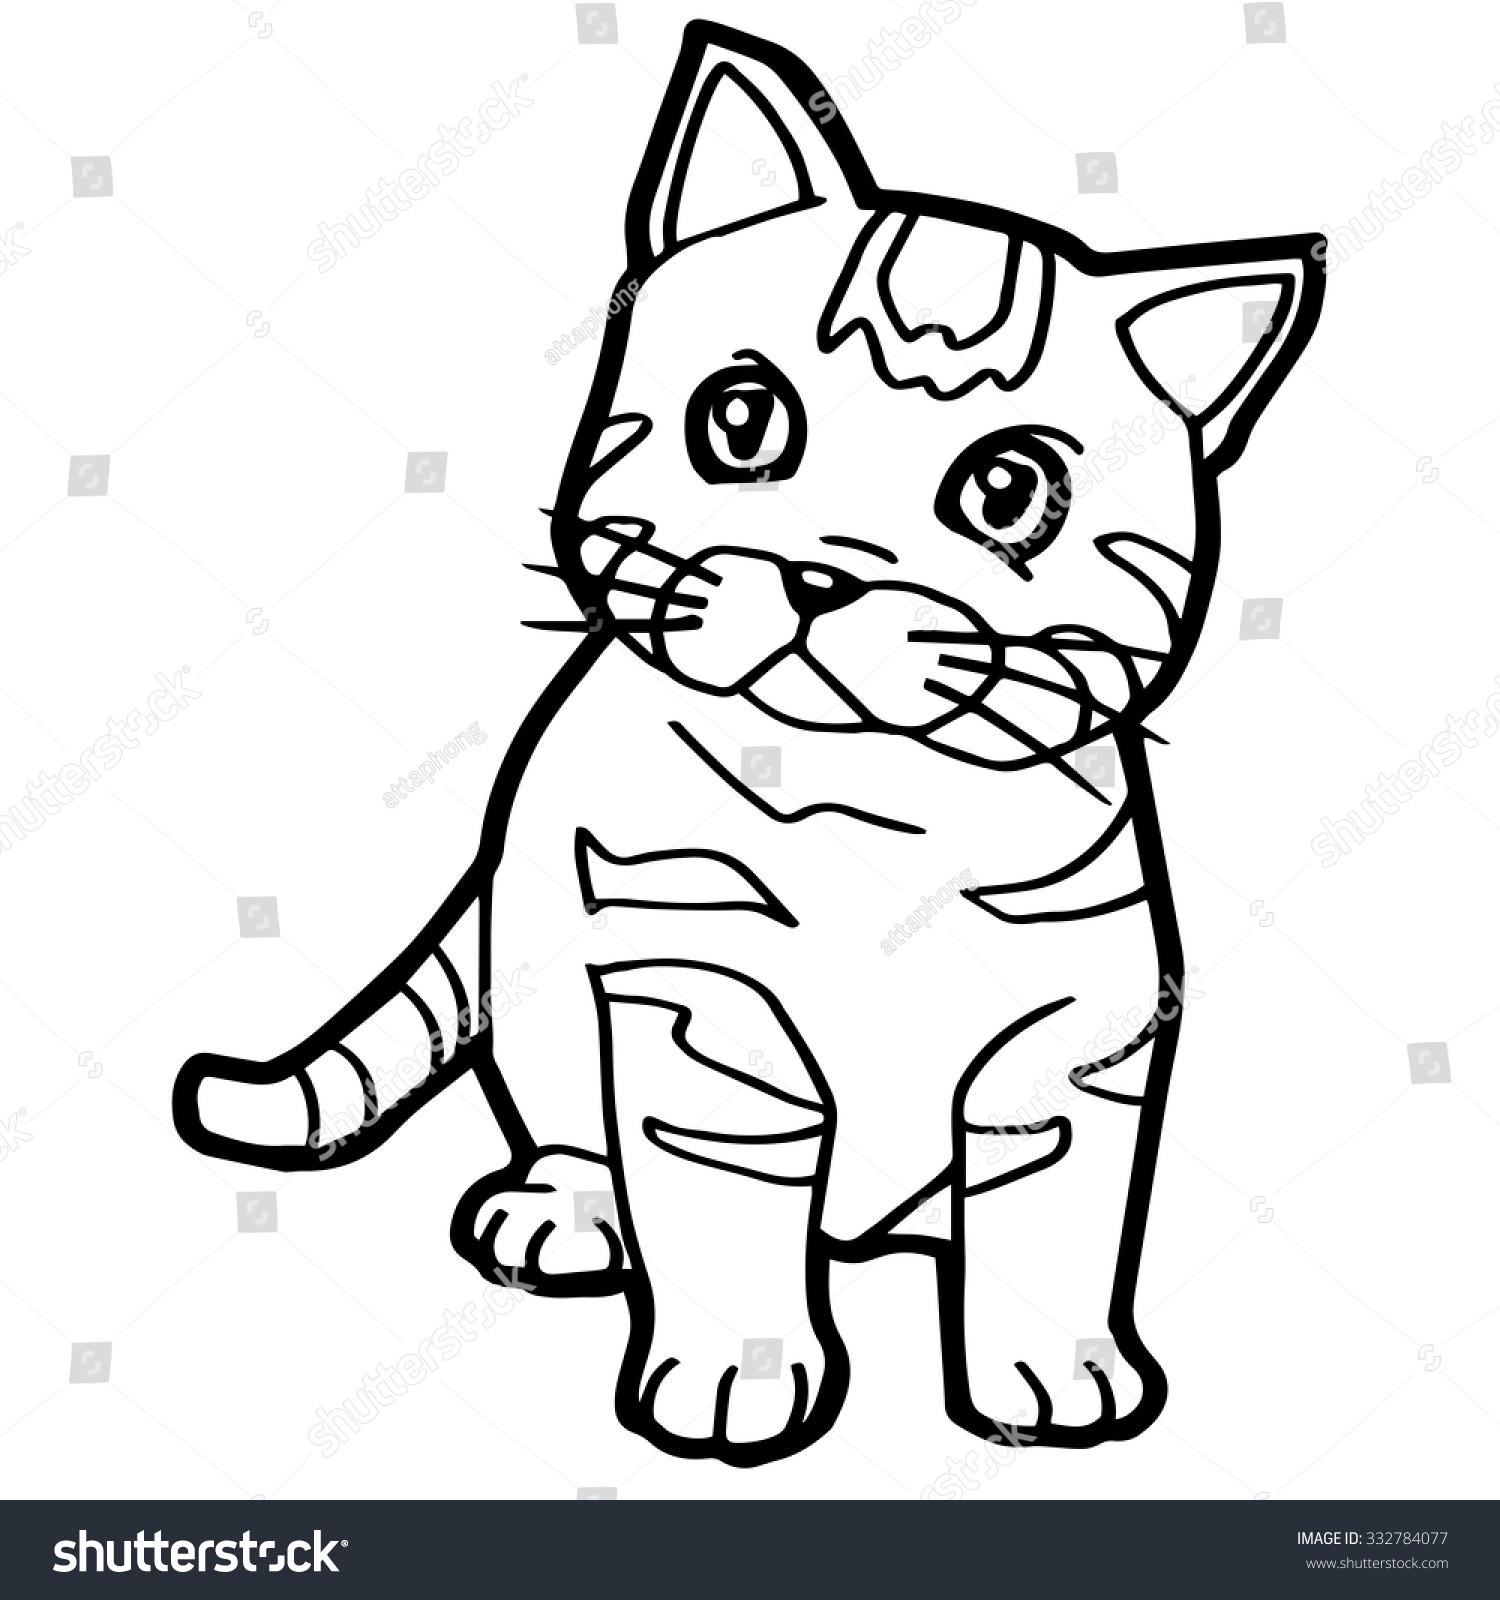 Cartoon Cat Coloring Page Vector - 332784077 : Shutterstock